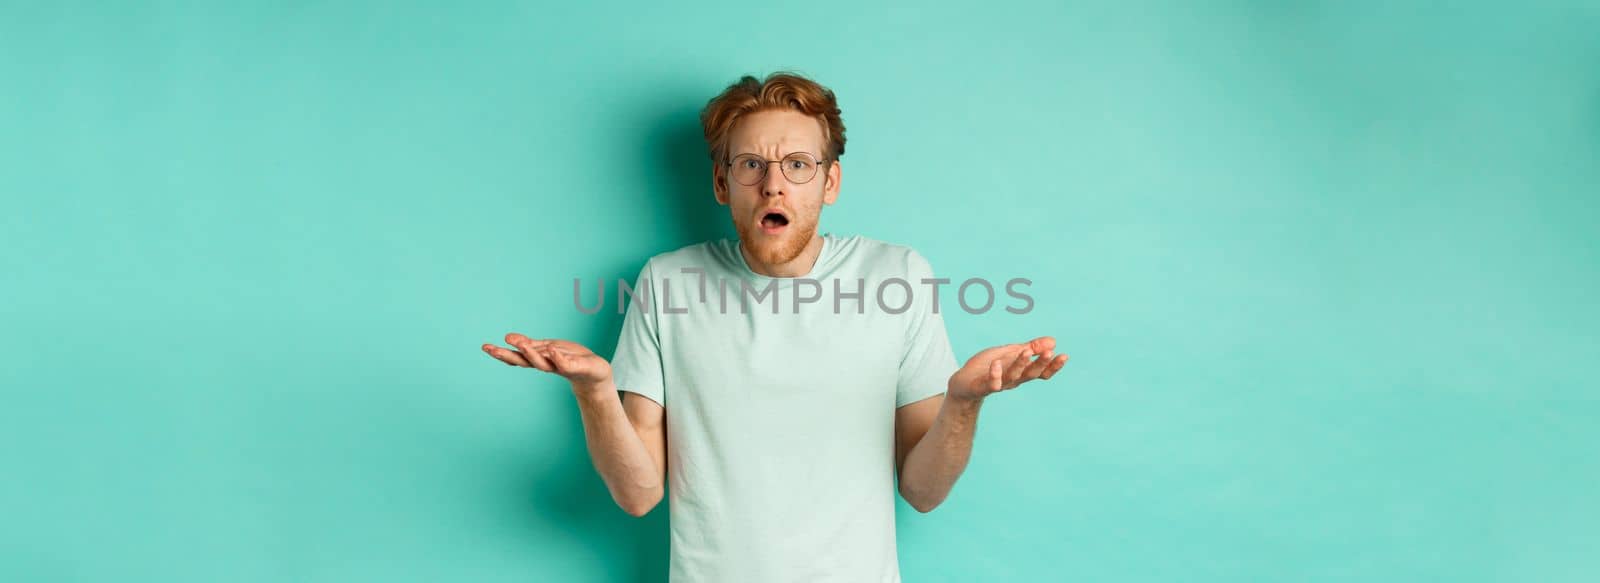 Confused and shocked guy with red messy hair and glasses, shrugging and raising hands, staring at something strange, cant understand, standing over turquoise background.